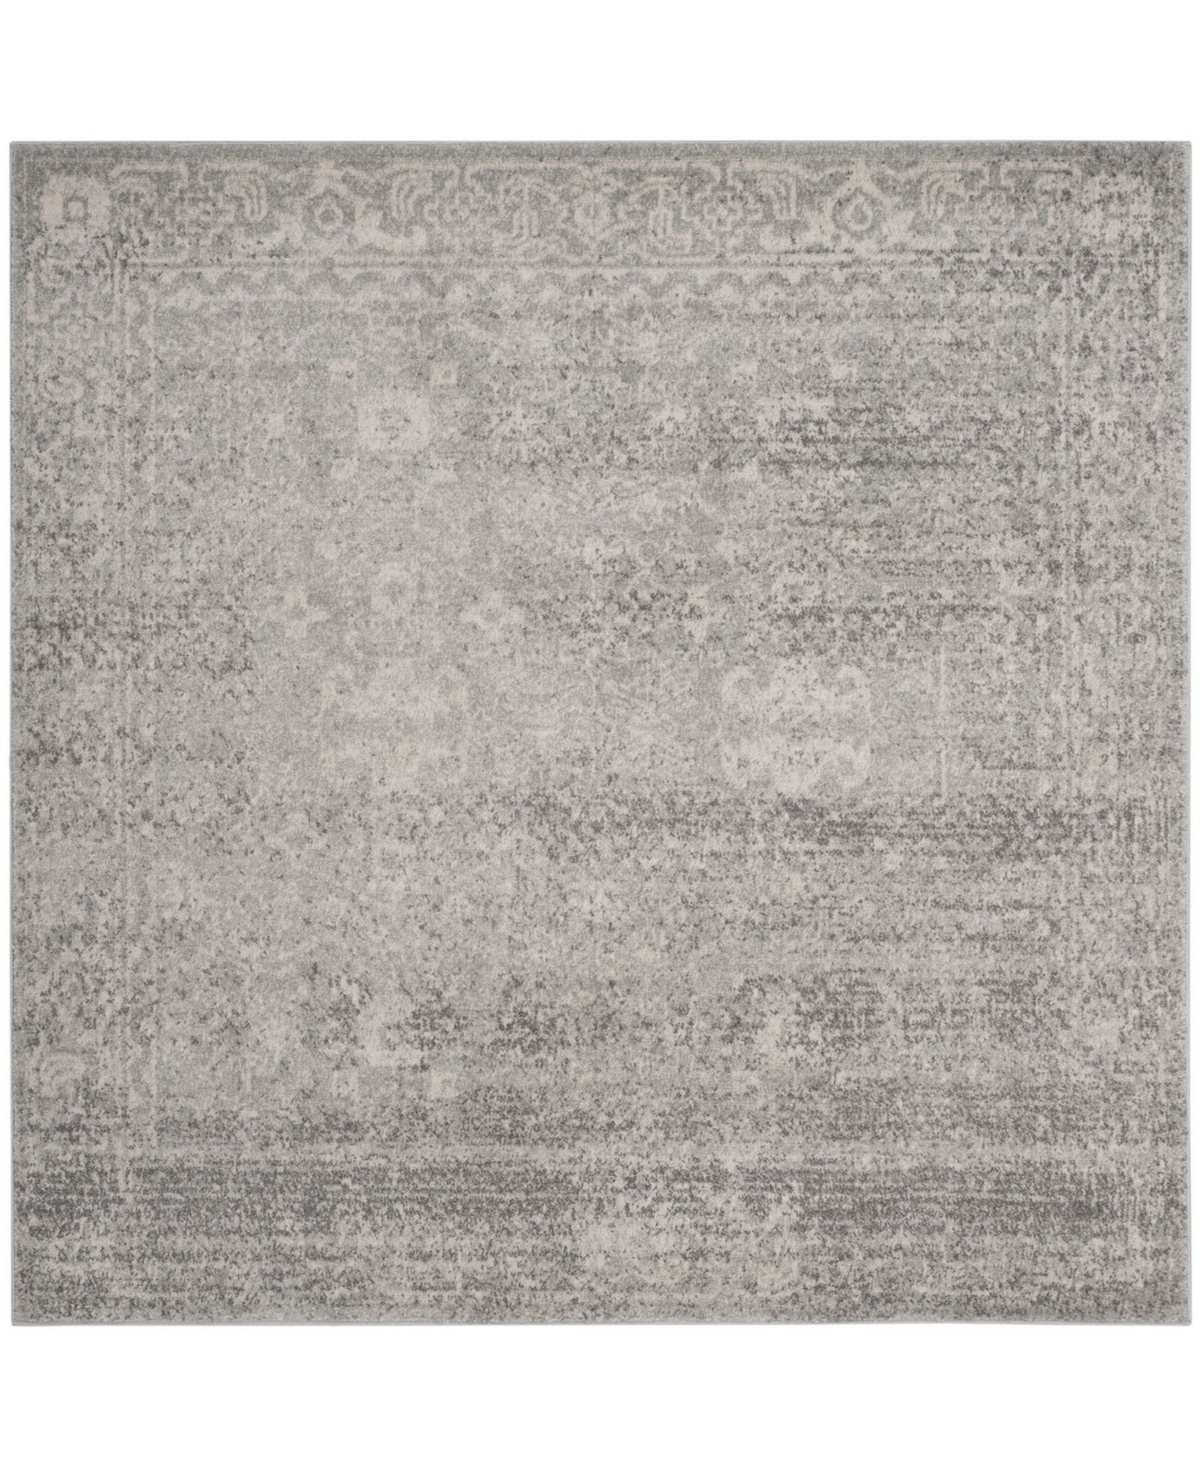 Safavieh Evoke Silver and Ivory 9' x 9' Square Area Rug - Silver